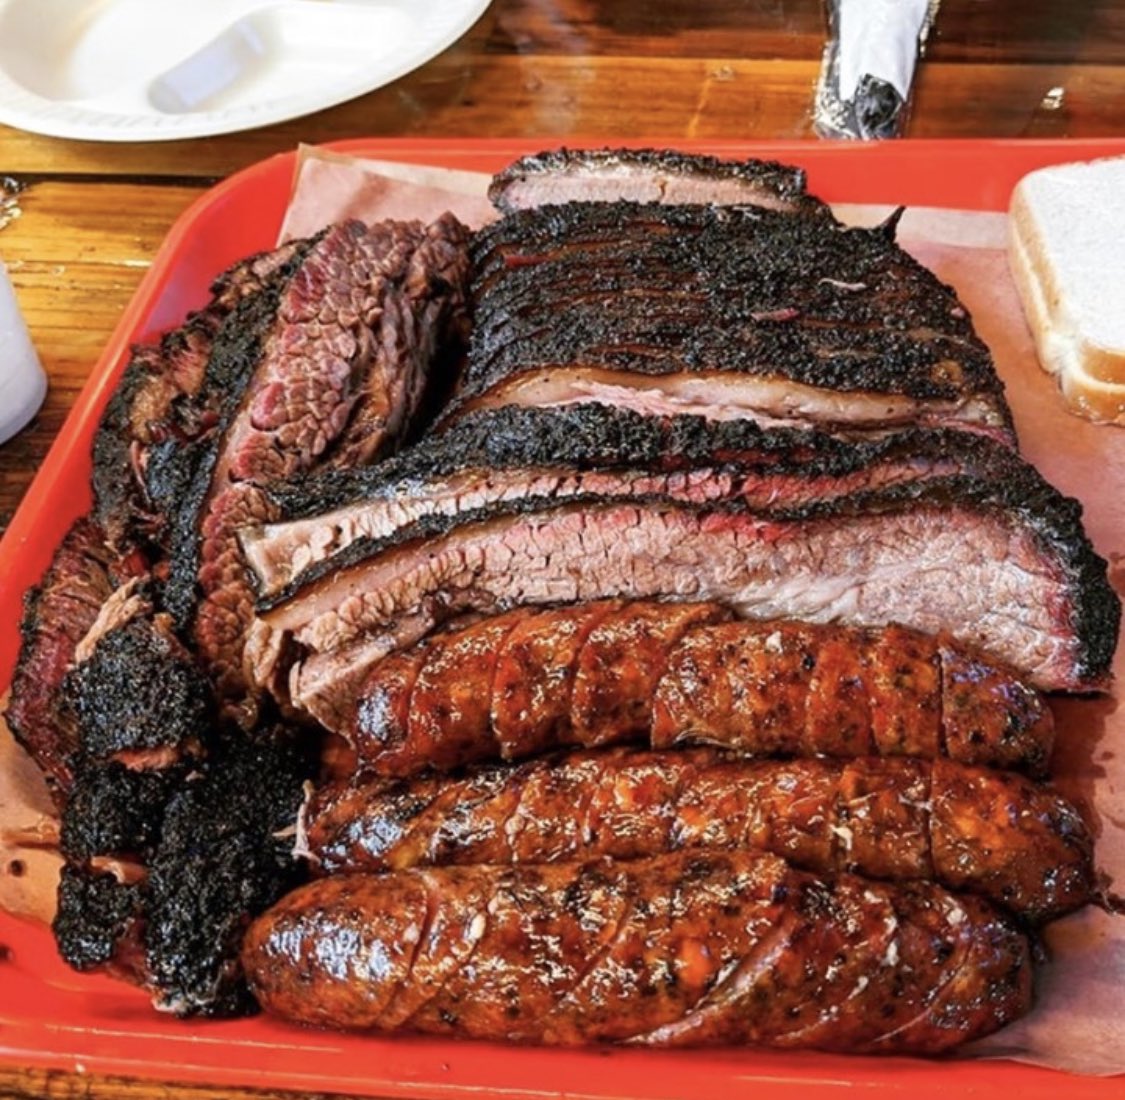 Barbecued meats on a red plate 